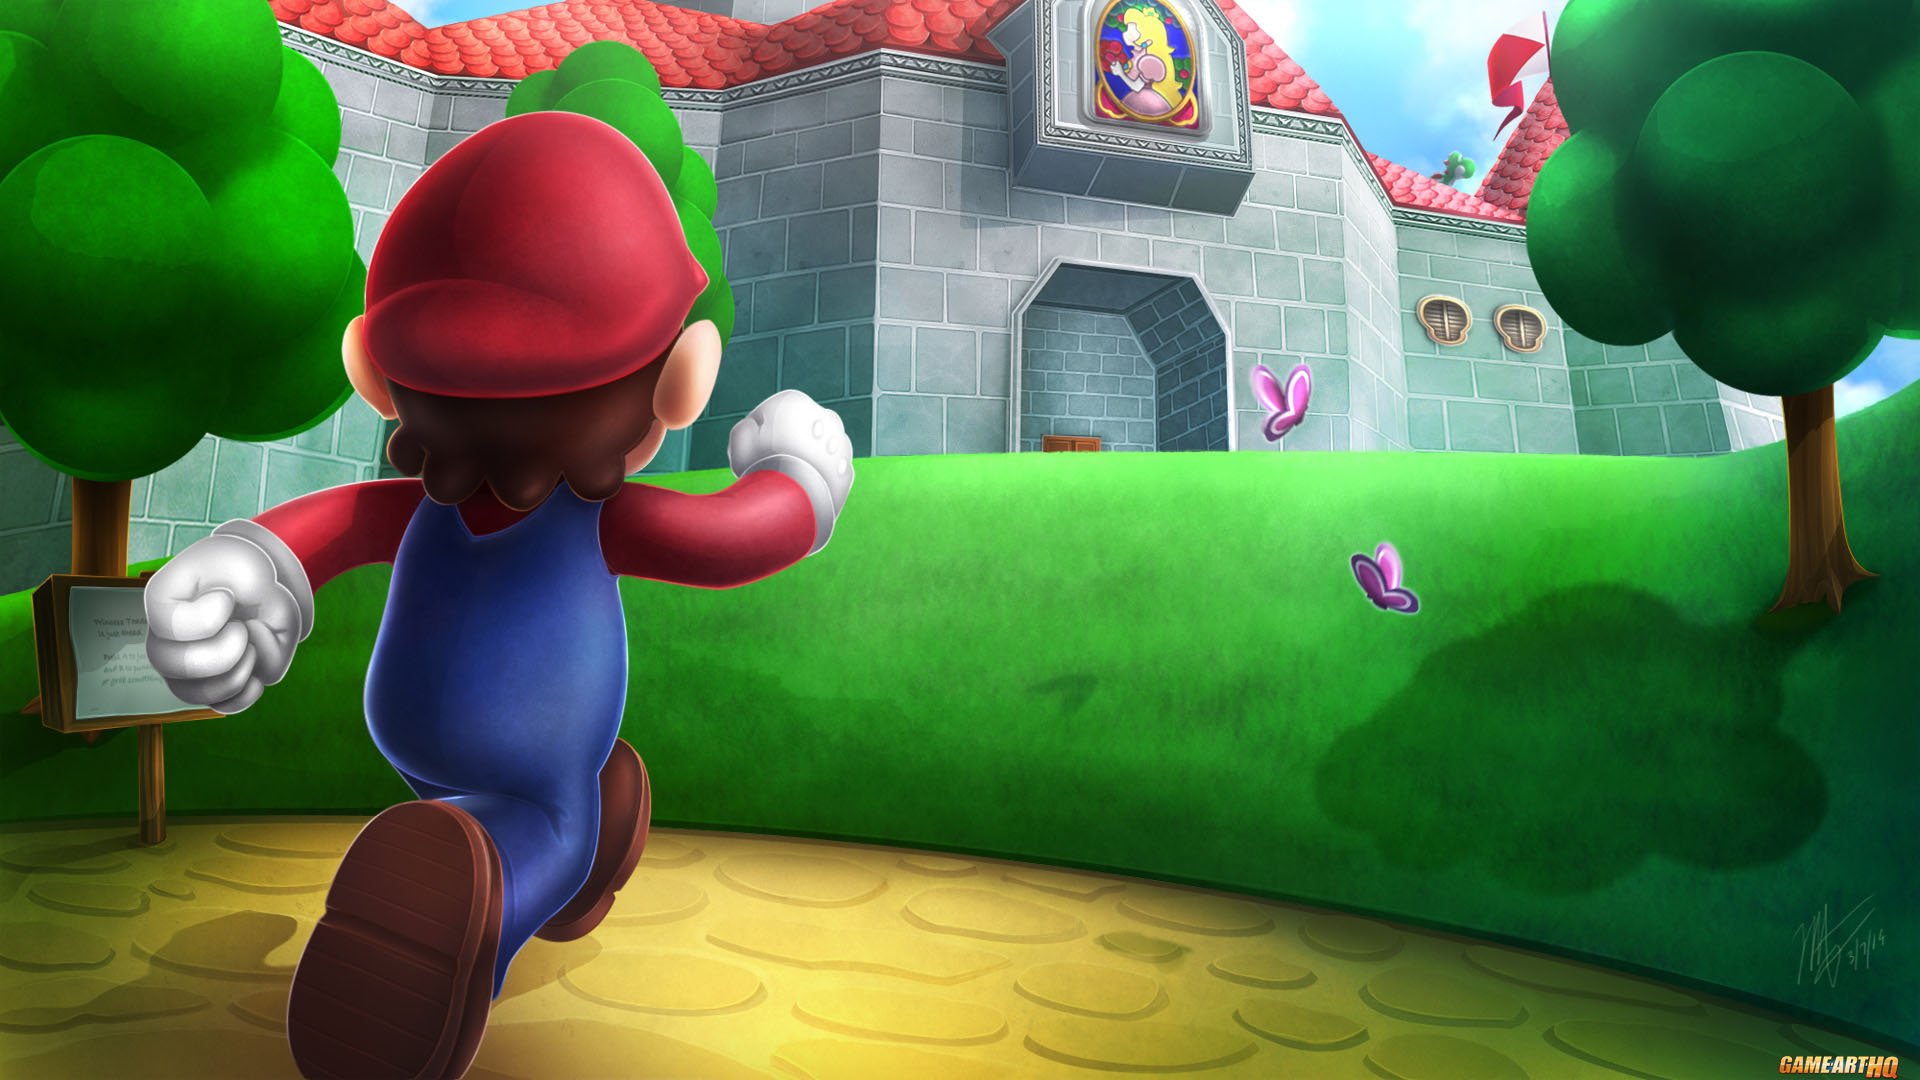 Super Mario 64 HD Wallpapers and Backgrounds